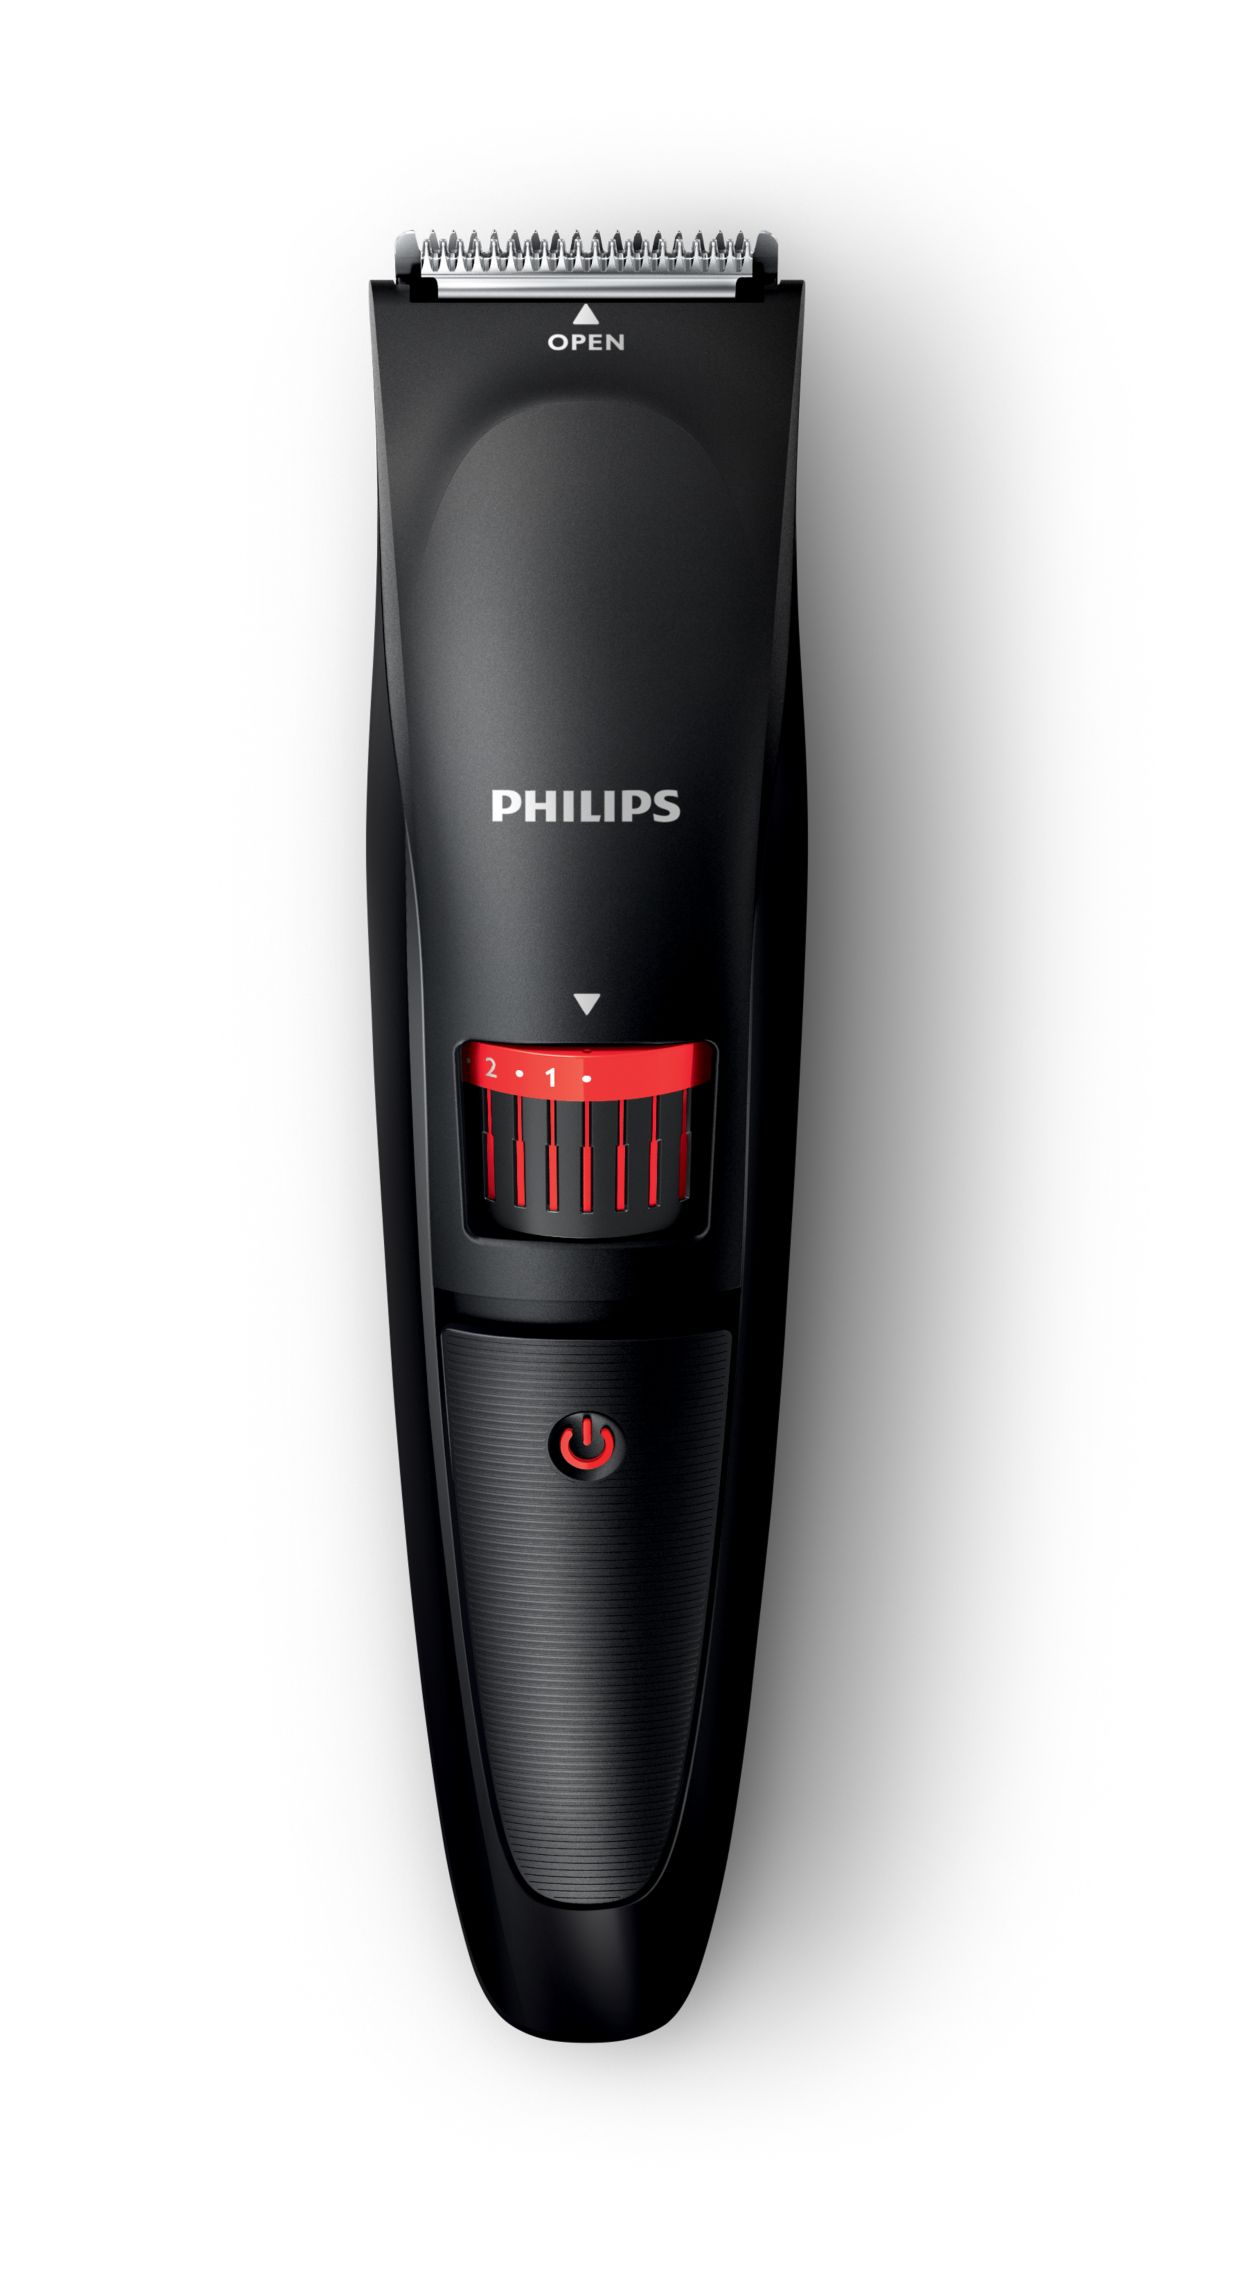 https://images.philips.com/is/image/philipsconsumer/d786ea8a53a643198586ae7d014d0ef9?$jpglarge$&wid=1250